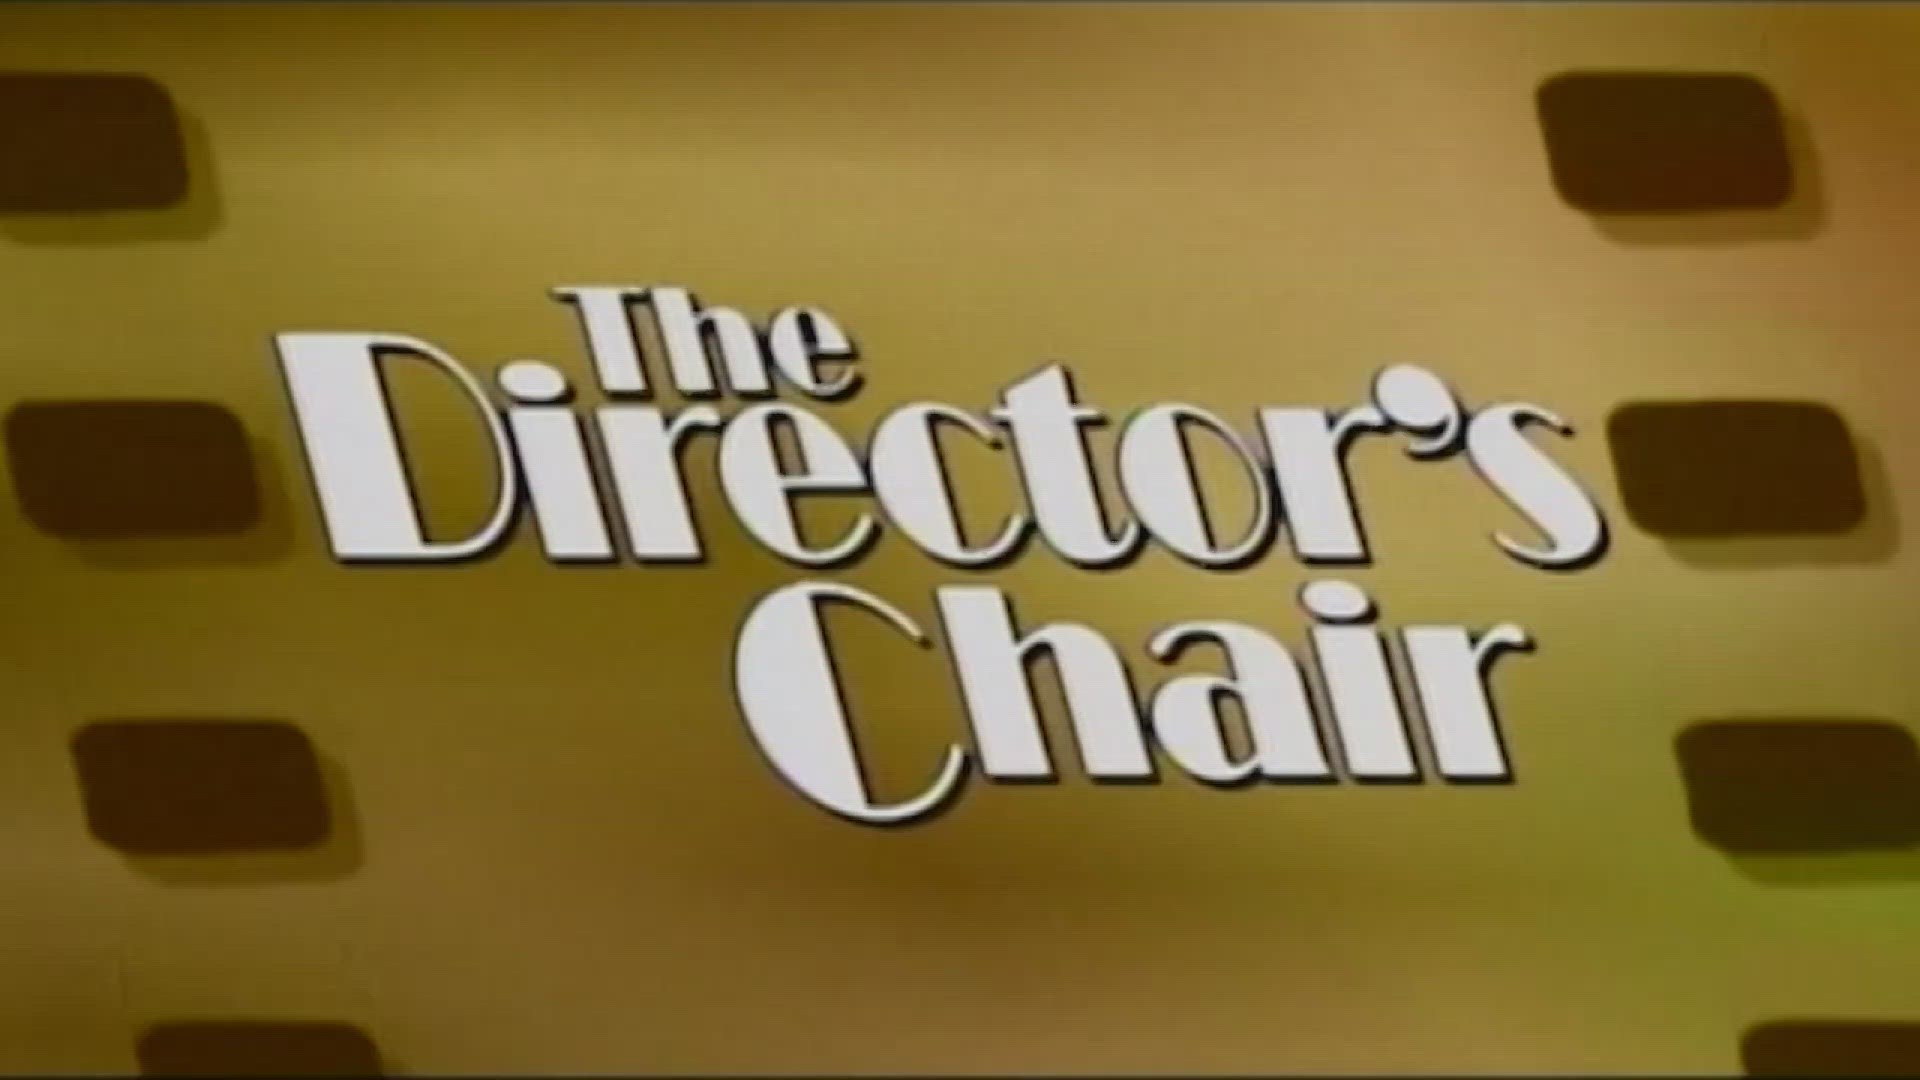 Check out this week's edition of the Director's Chair.